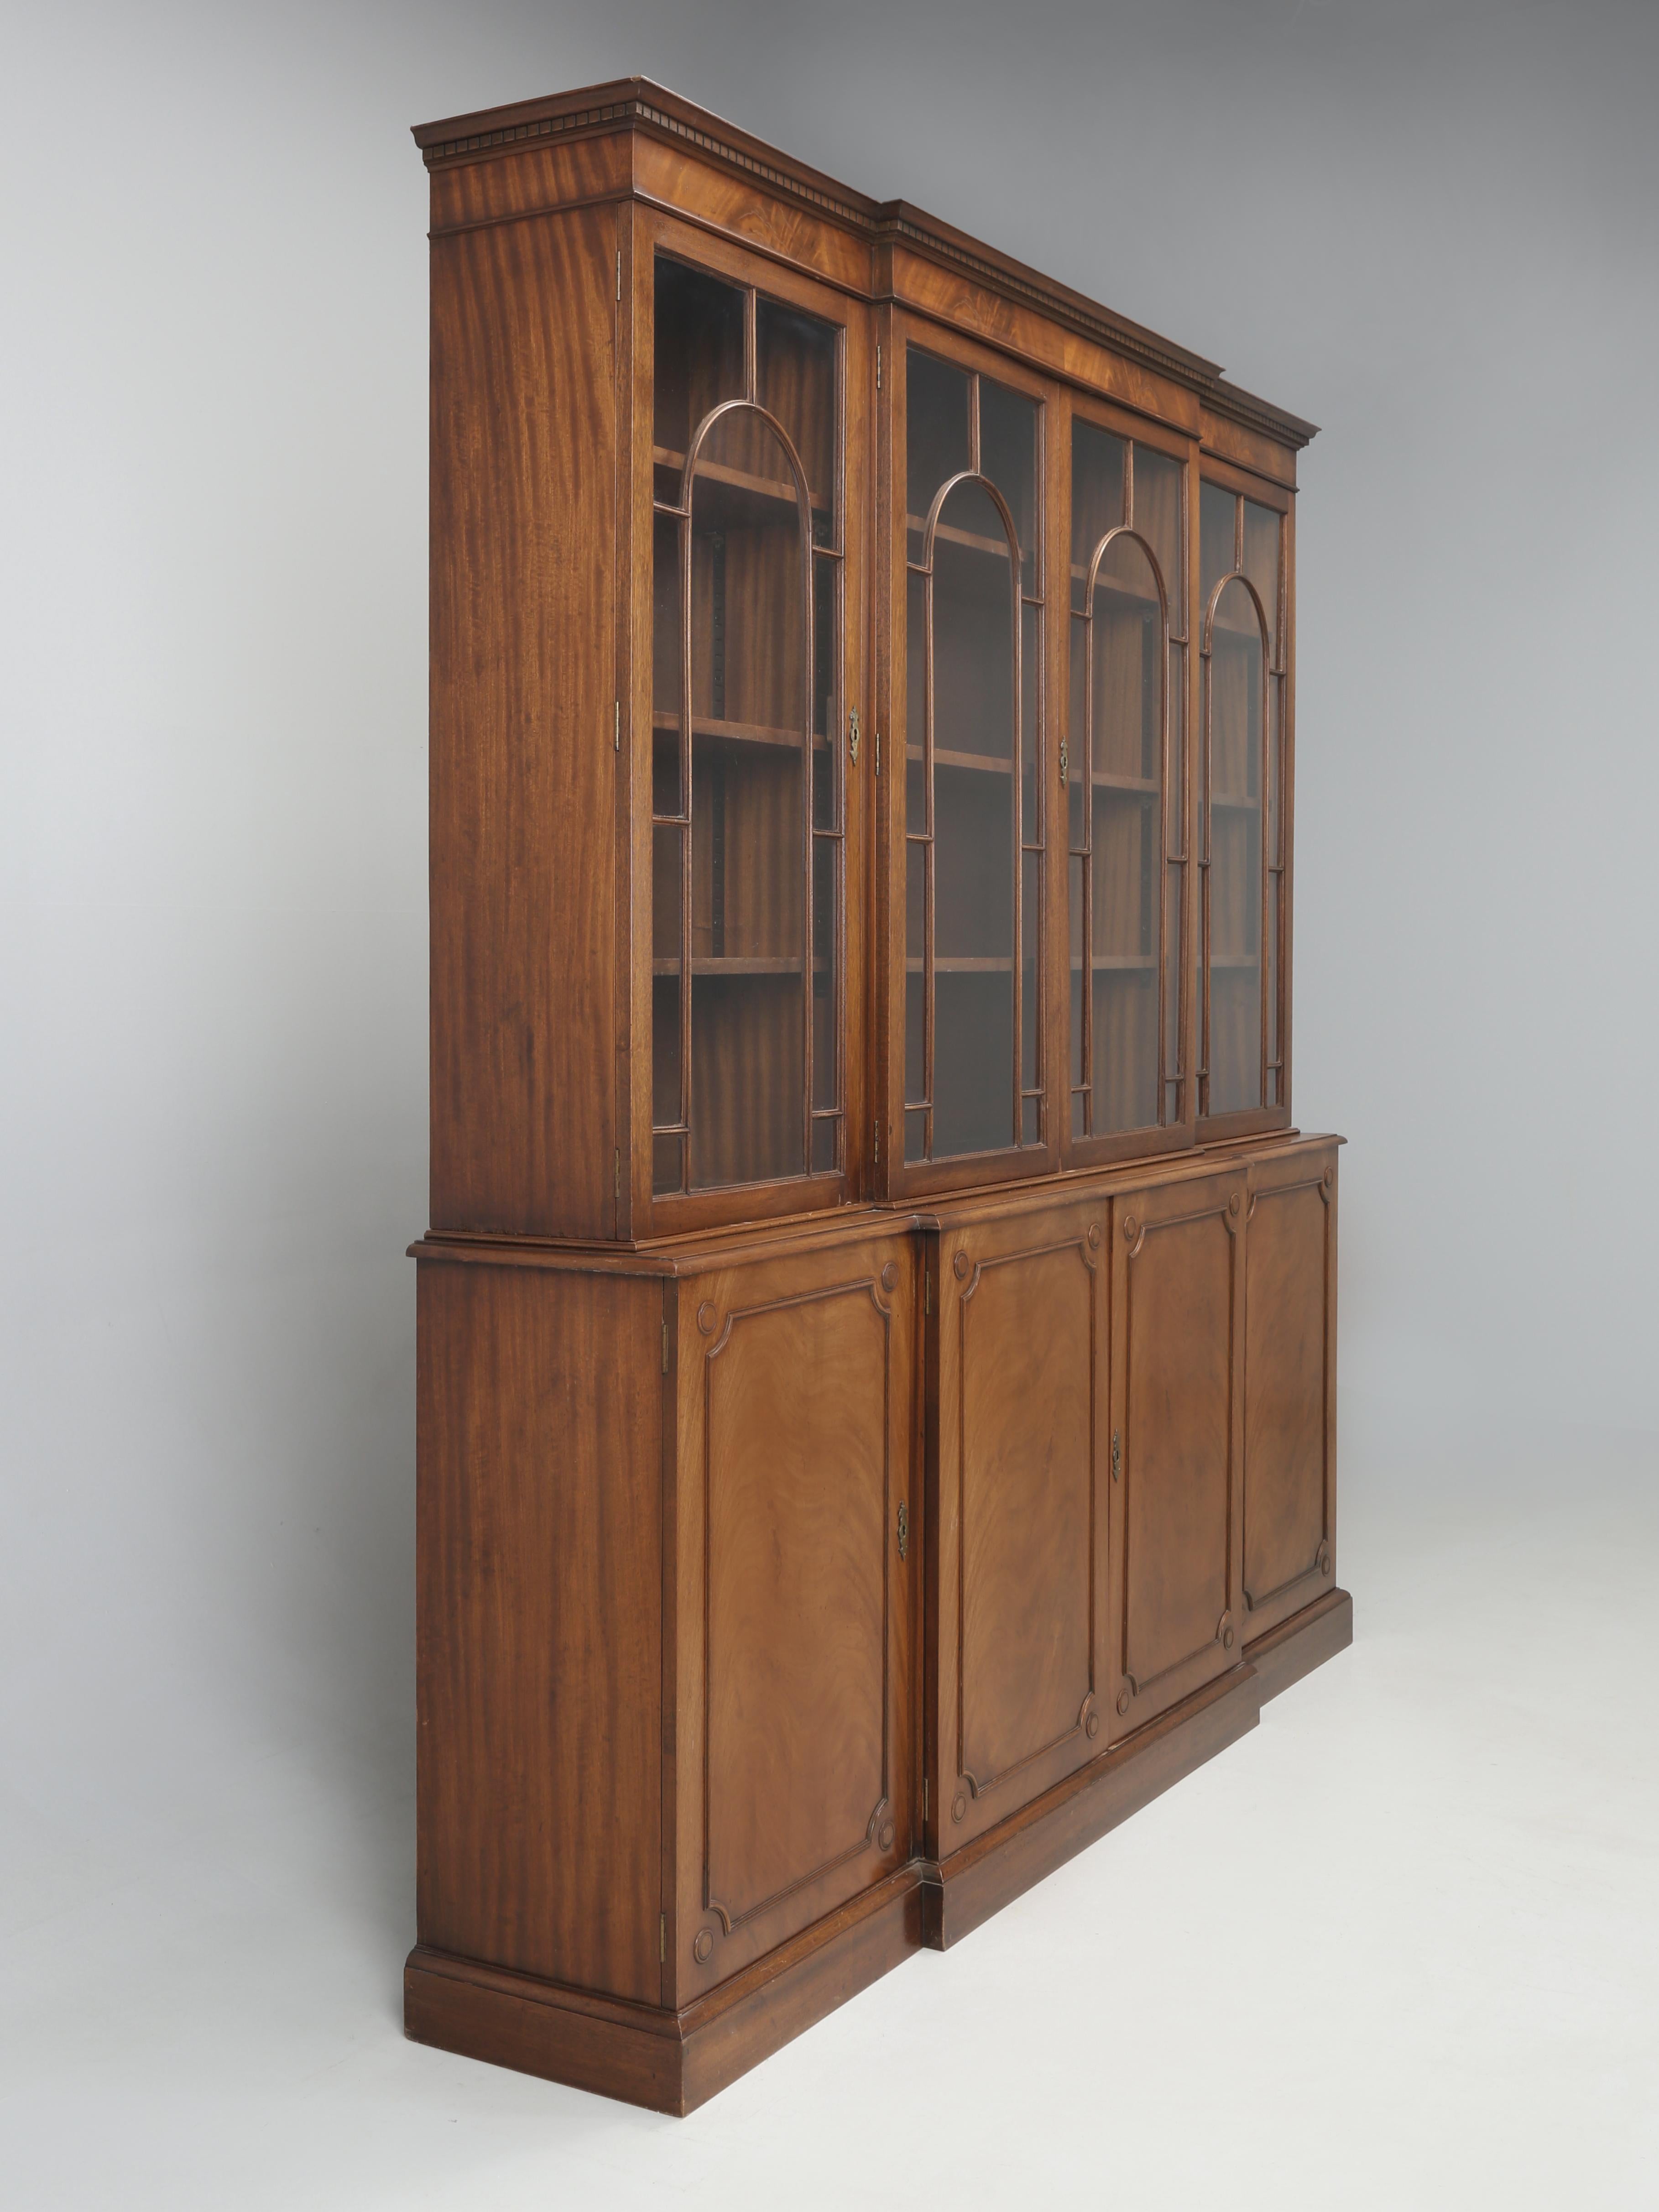 Vintage English Georgian Style Breakfront Mahogany Bookcase or China Cabinet with four beautiful and unusual arch glass doors. The Georgian Style English Mahogany Bookcase appears to be in completely original condition and is very presentable as is,